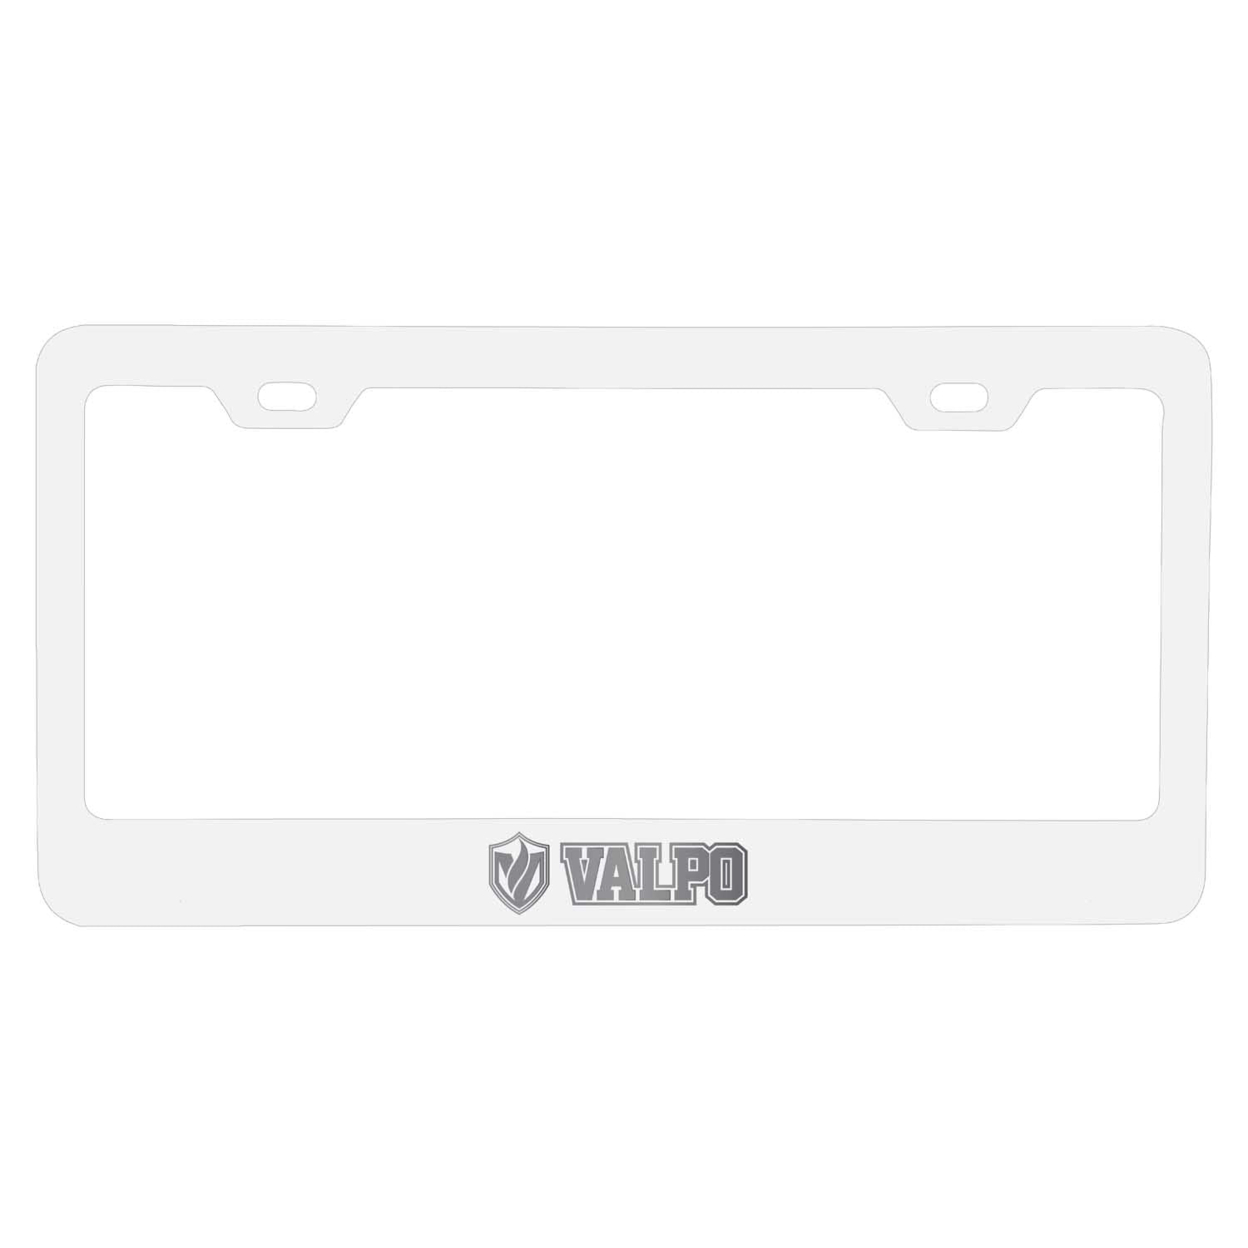 Valparaiso University Etched Metal License Plate Frame Choose Your Color